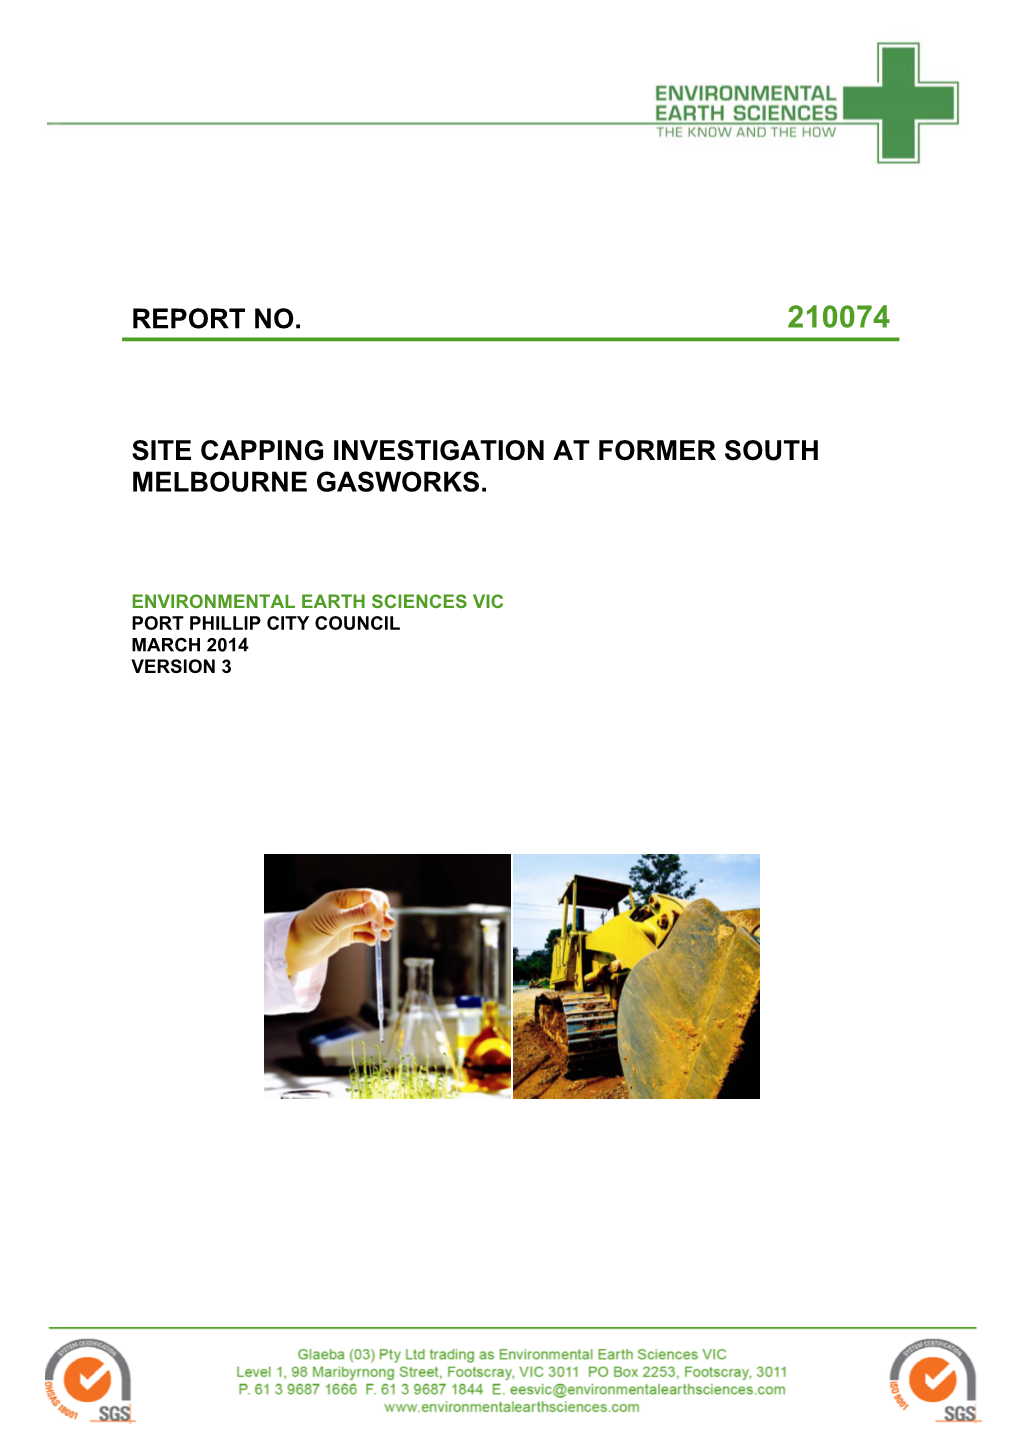 Report No. 210074 Site Capping Investigation at Former South